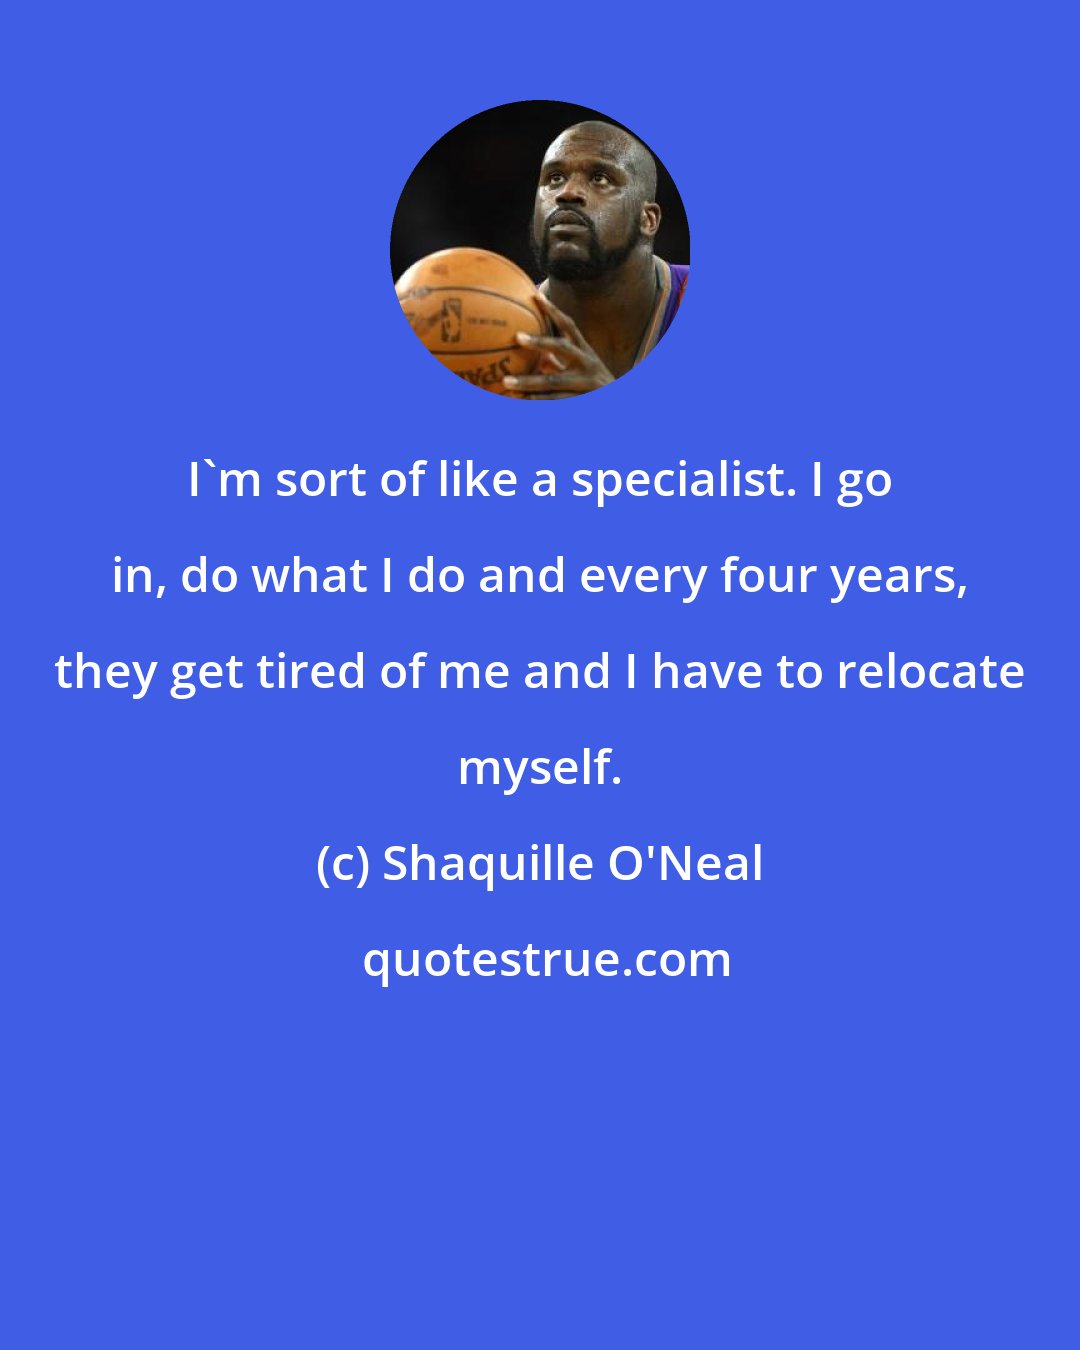 Shaquille O'Neal: I'm sort of like a specialist. I go in, do what I do and every four years, they get tired of me and I have to relocate myself.